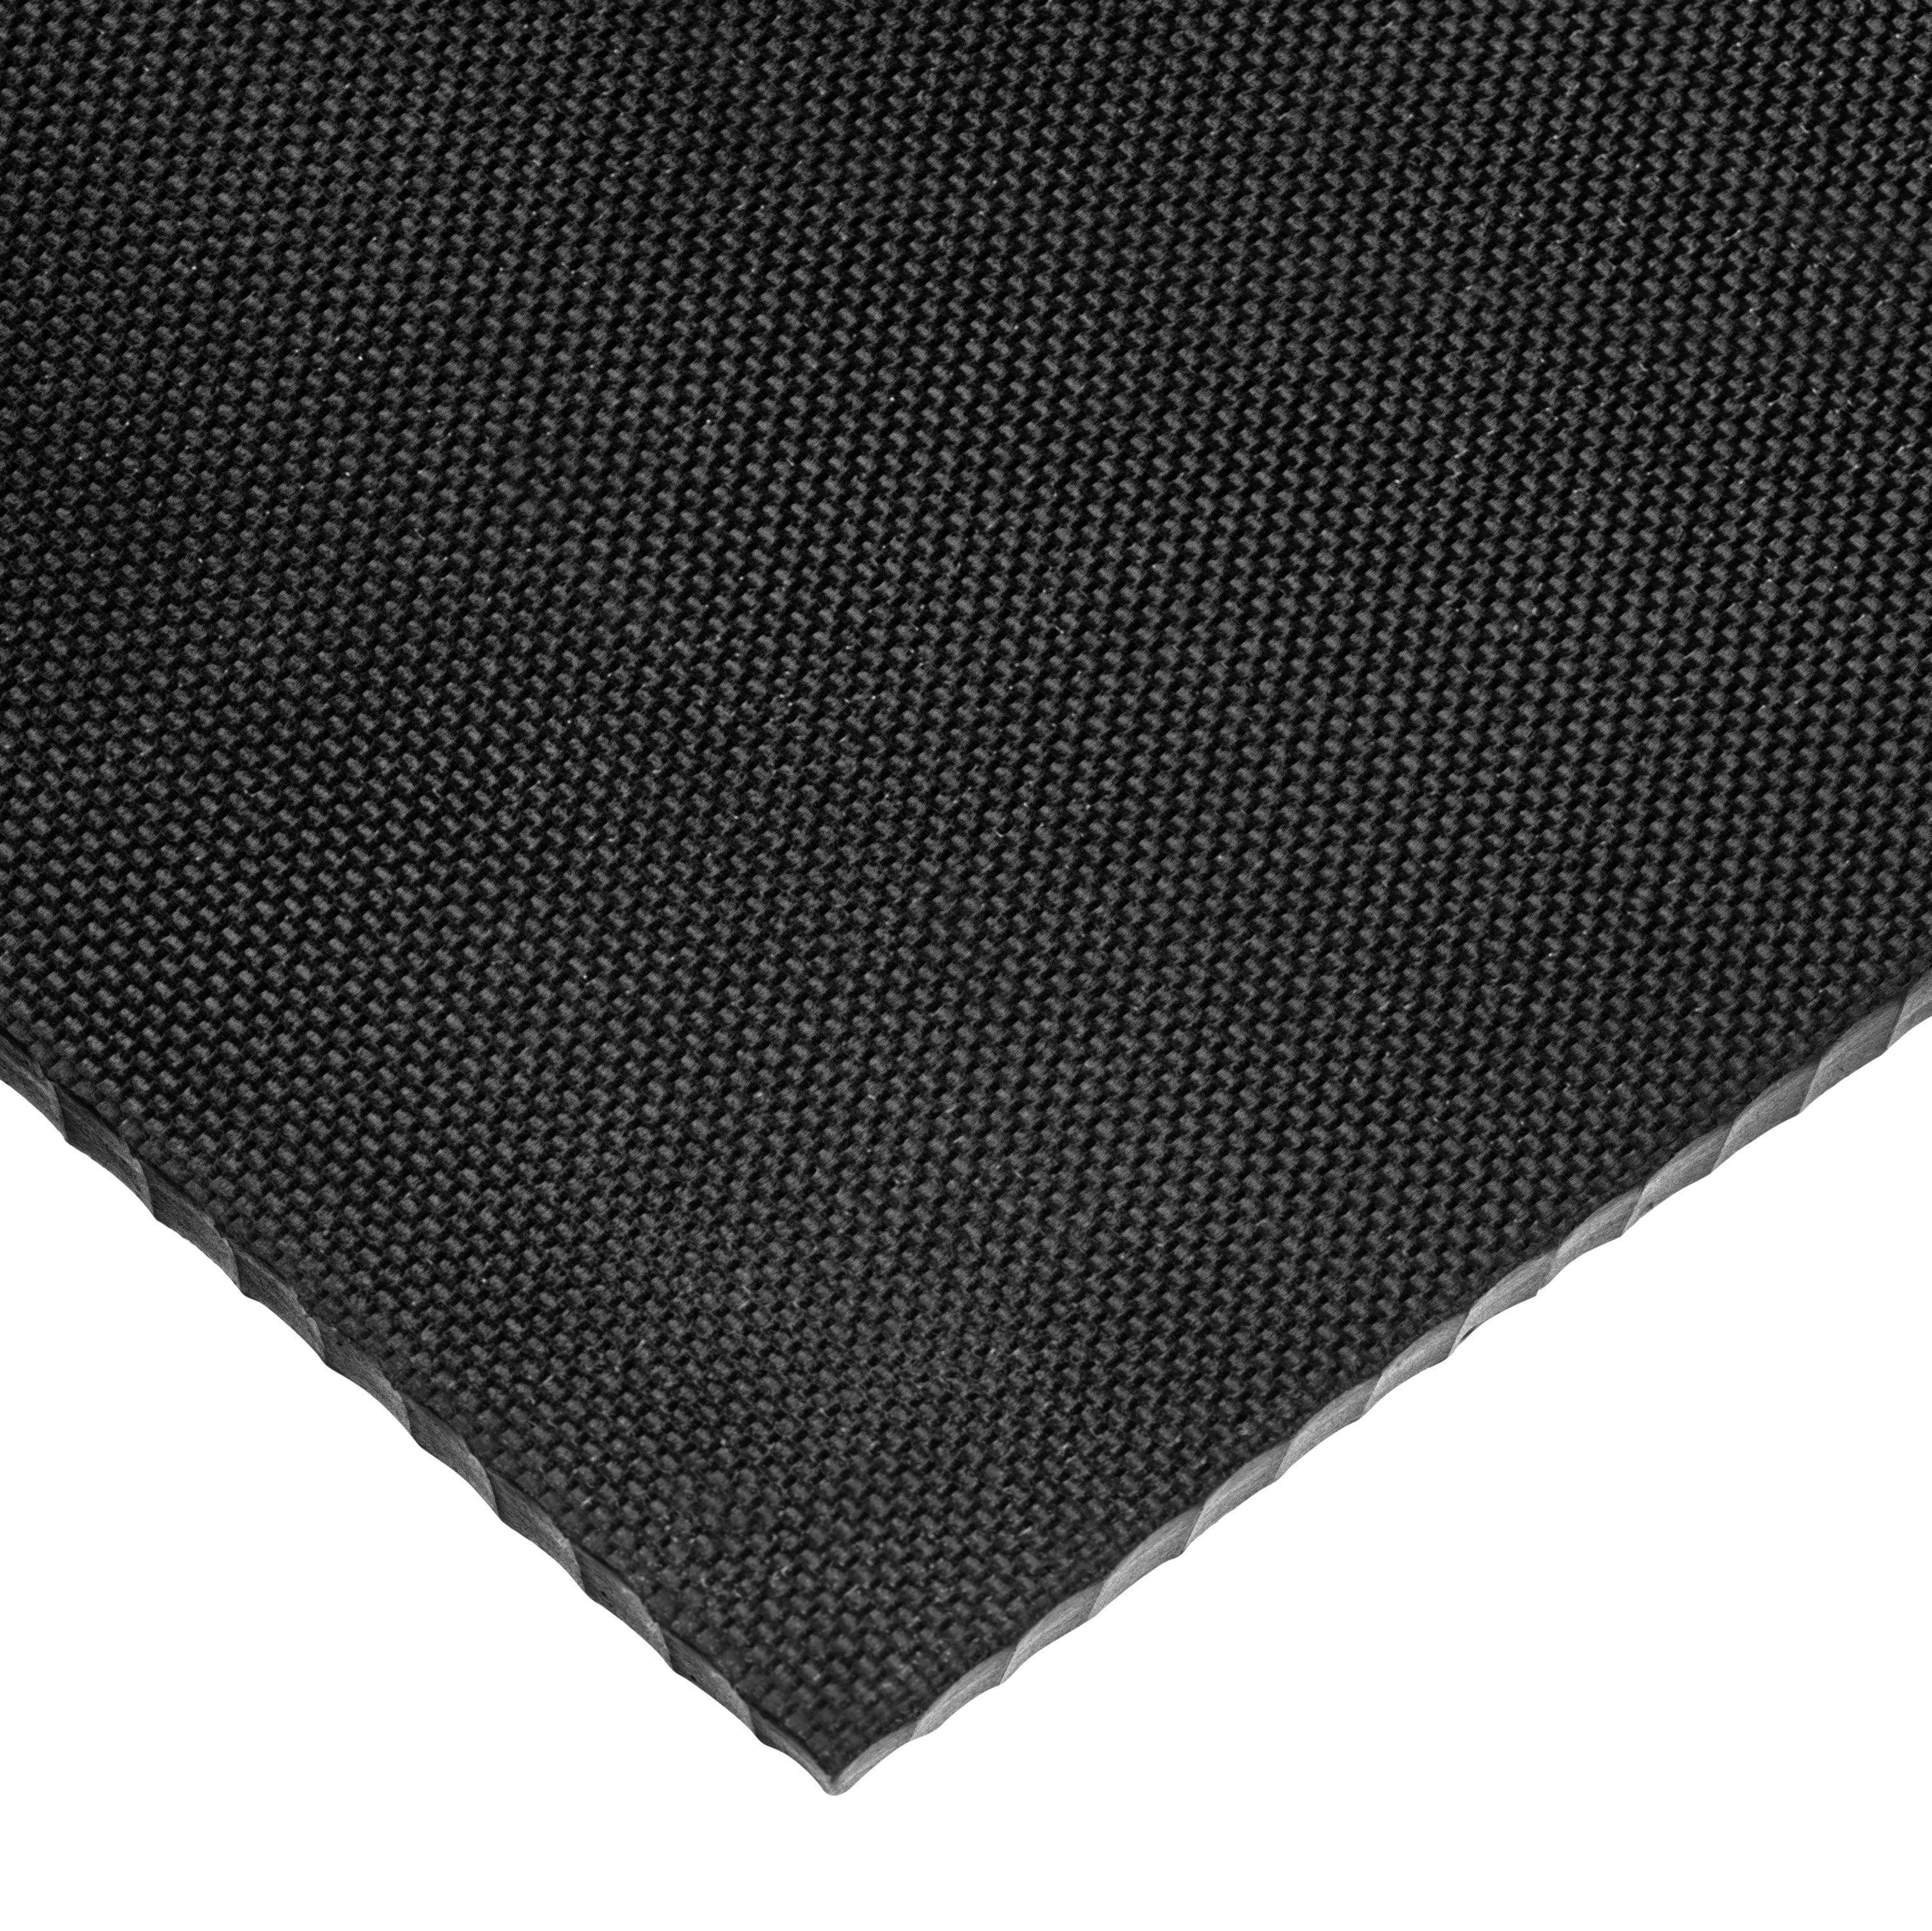 1/16 Thick x 12 Wide x 12 Long 40A Textured Neoprene Rubber Sheet with Acrylic Adhesive